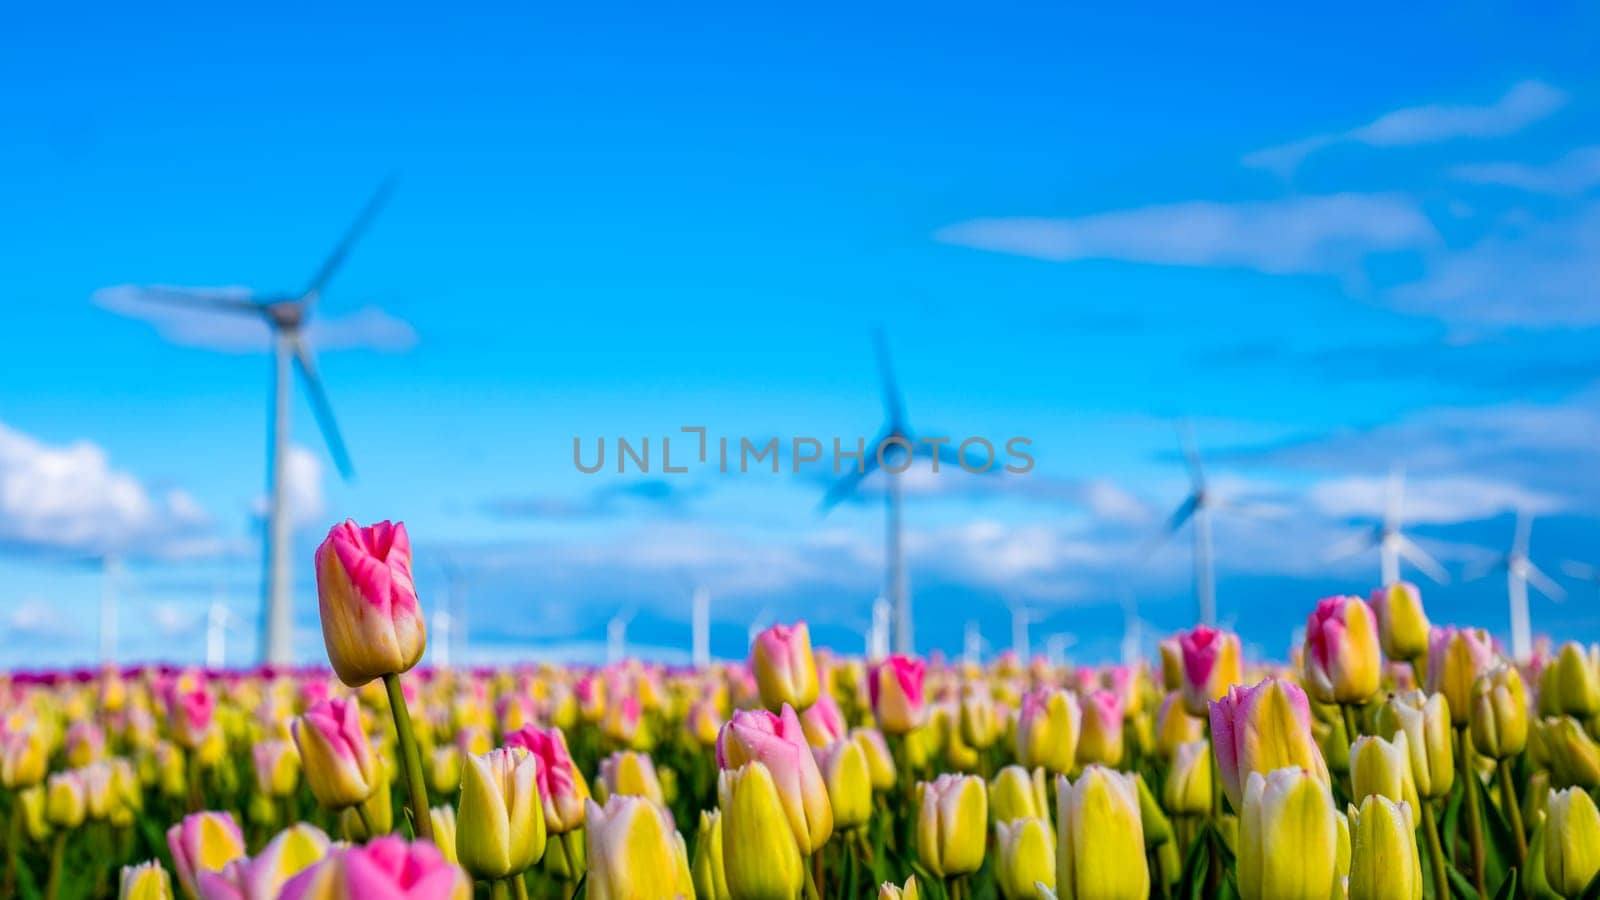 A vibrant field of tulips stretches endlessly, with majestic windmills towering in the background, spinning gracefully in the spring breeze by fokkebok